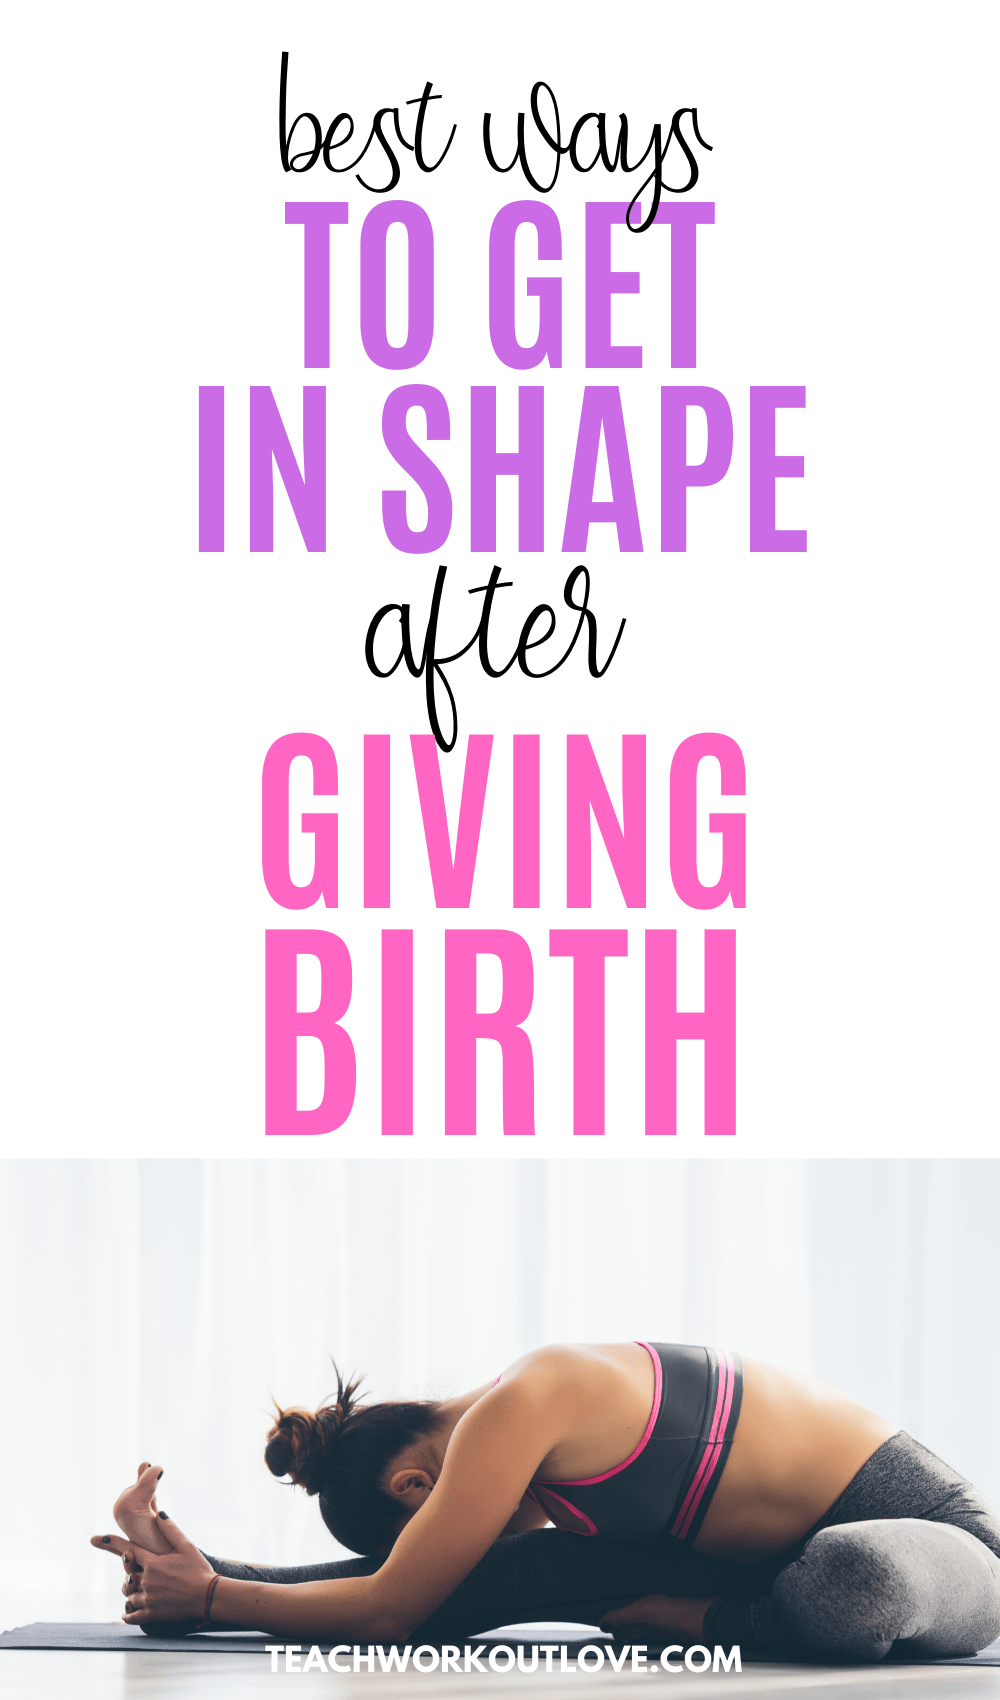 If you’ve just had a baby, you want to get in shape after giving birth. Exercising postpartum requires a few more considerations than exercising prior.